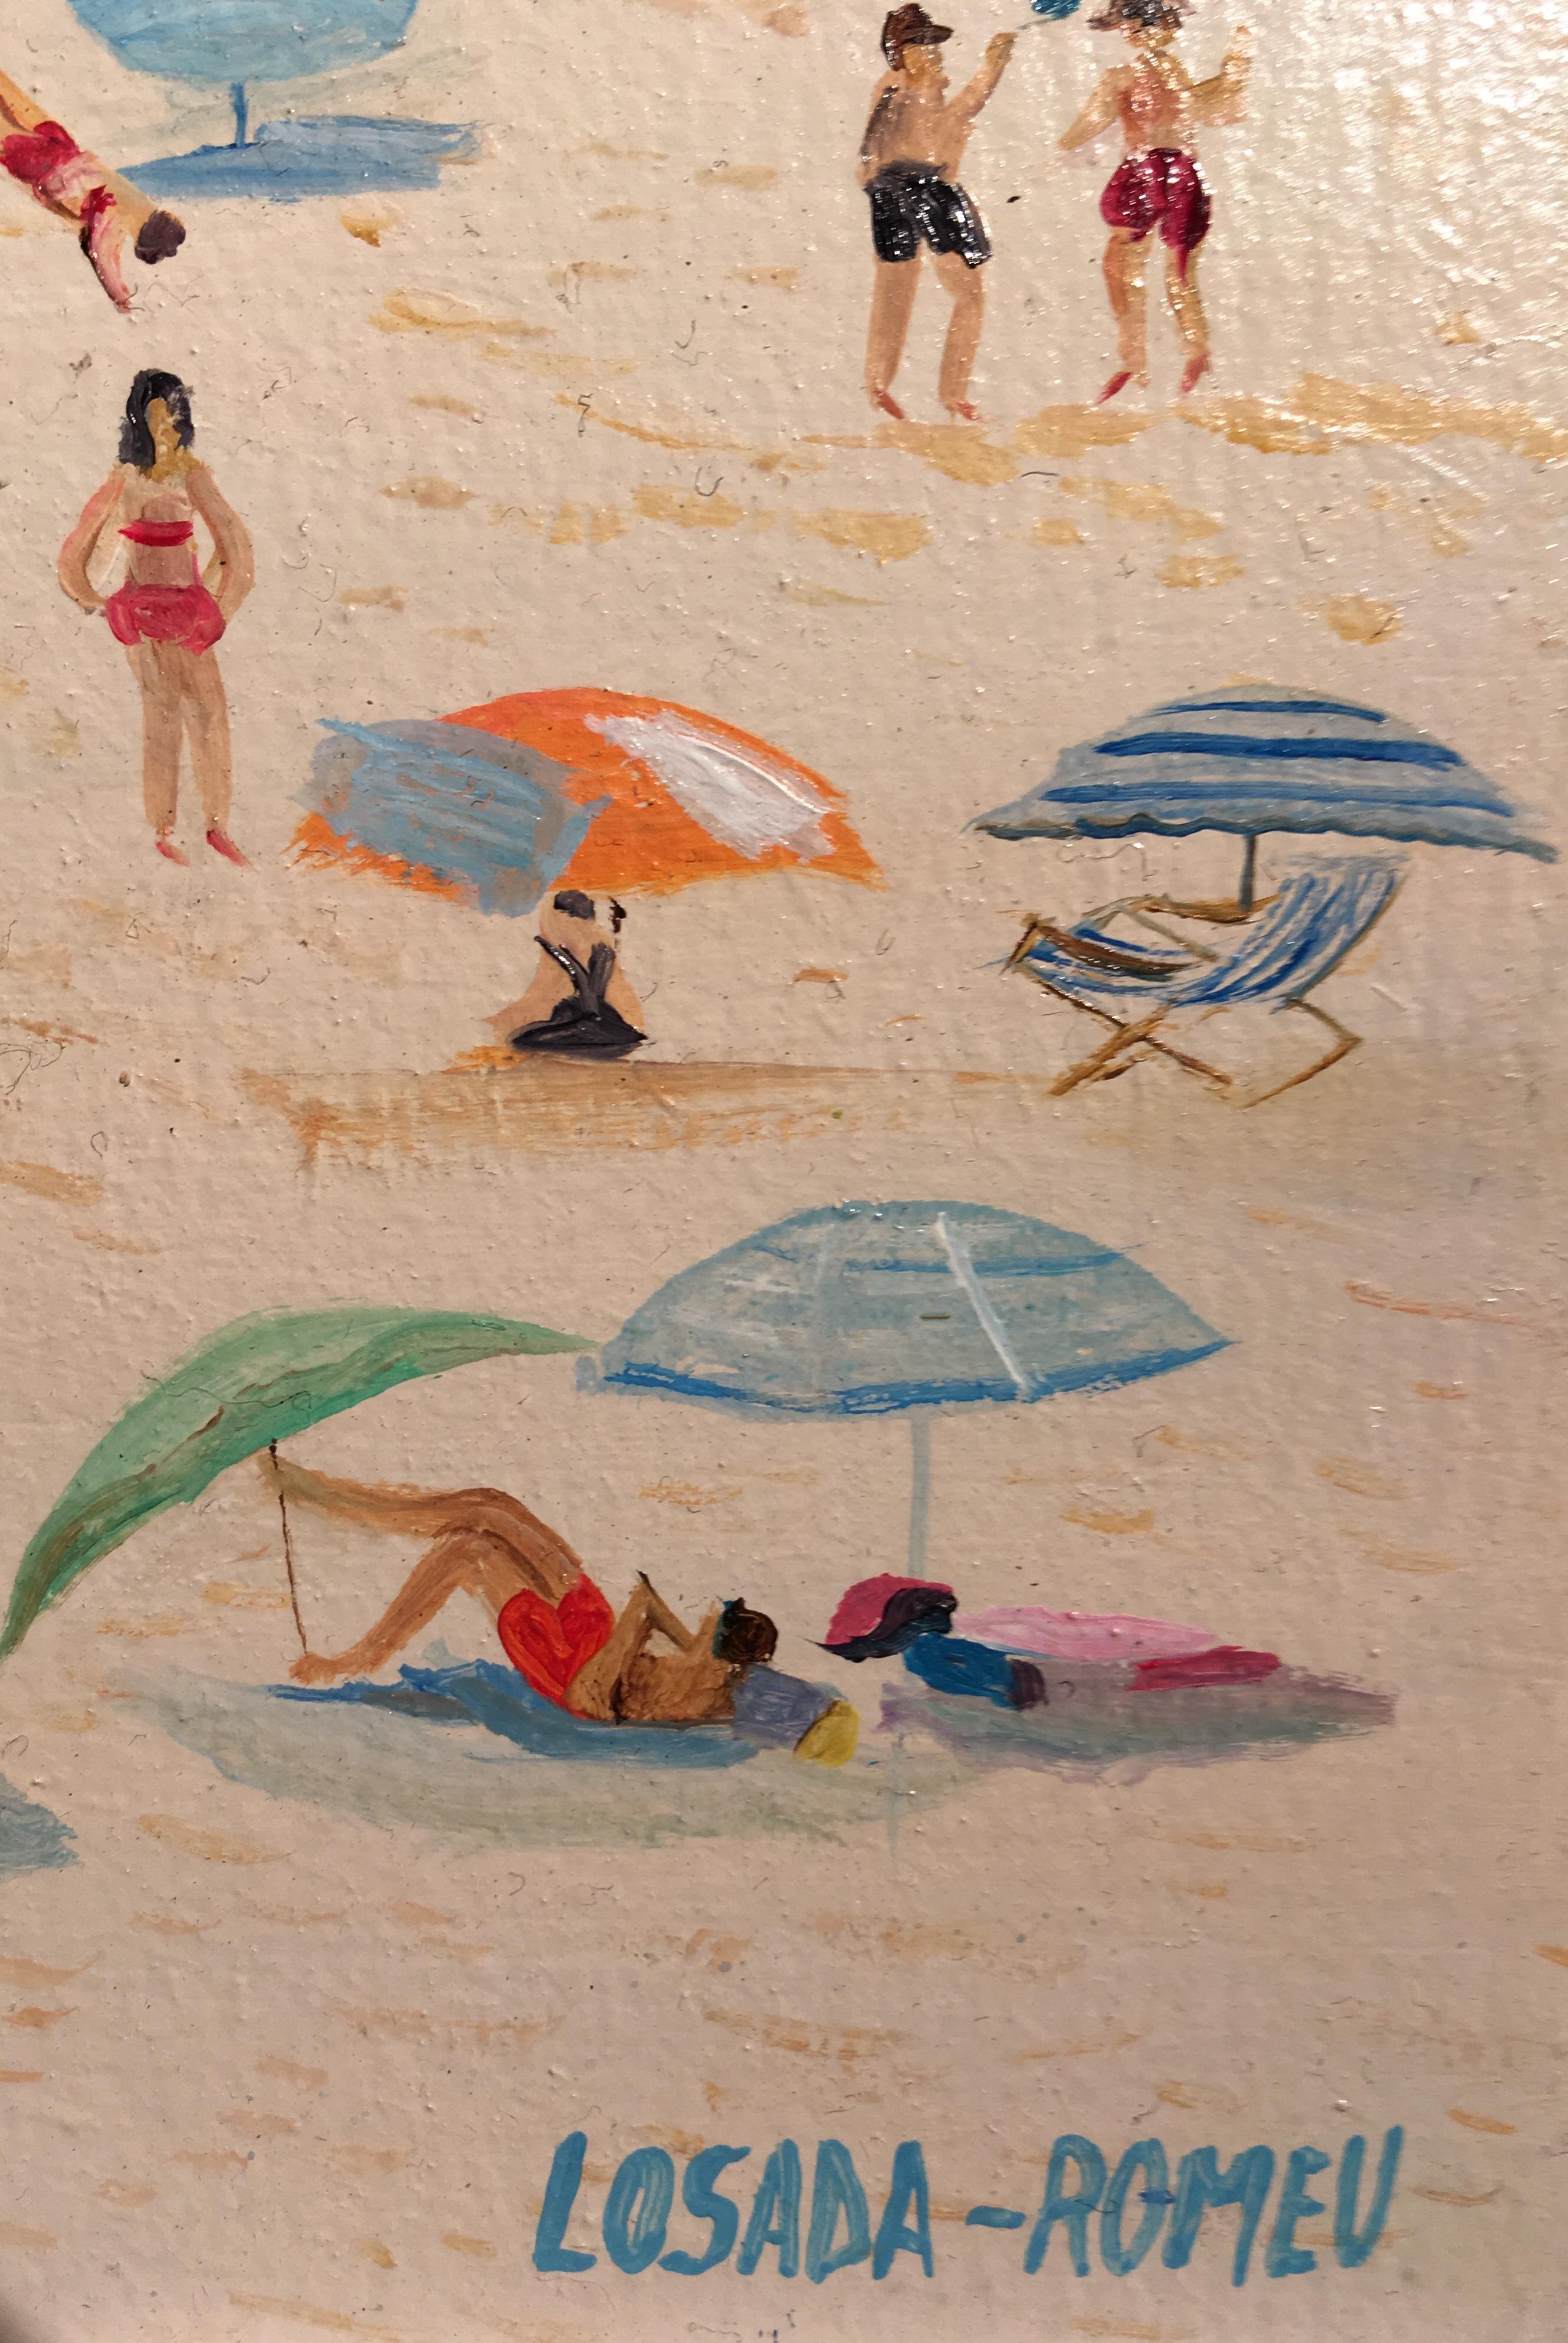 'Fun on the Beach' is a fabulously warm and inviting piece that would bring the beach inside your own home! Losada Romeu paints with such delicate hues bringing together colours that remind us of beautiful warm sunny beach days. Memories of relaxing